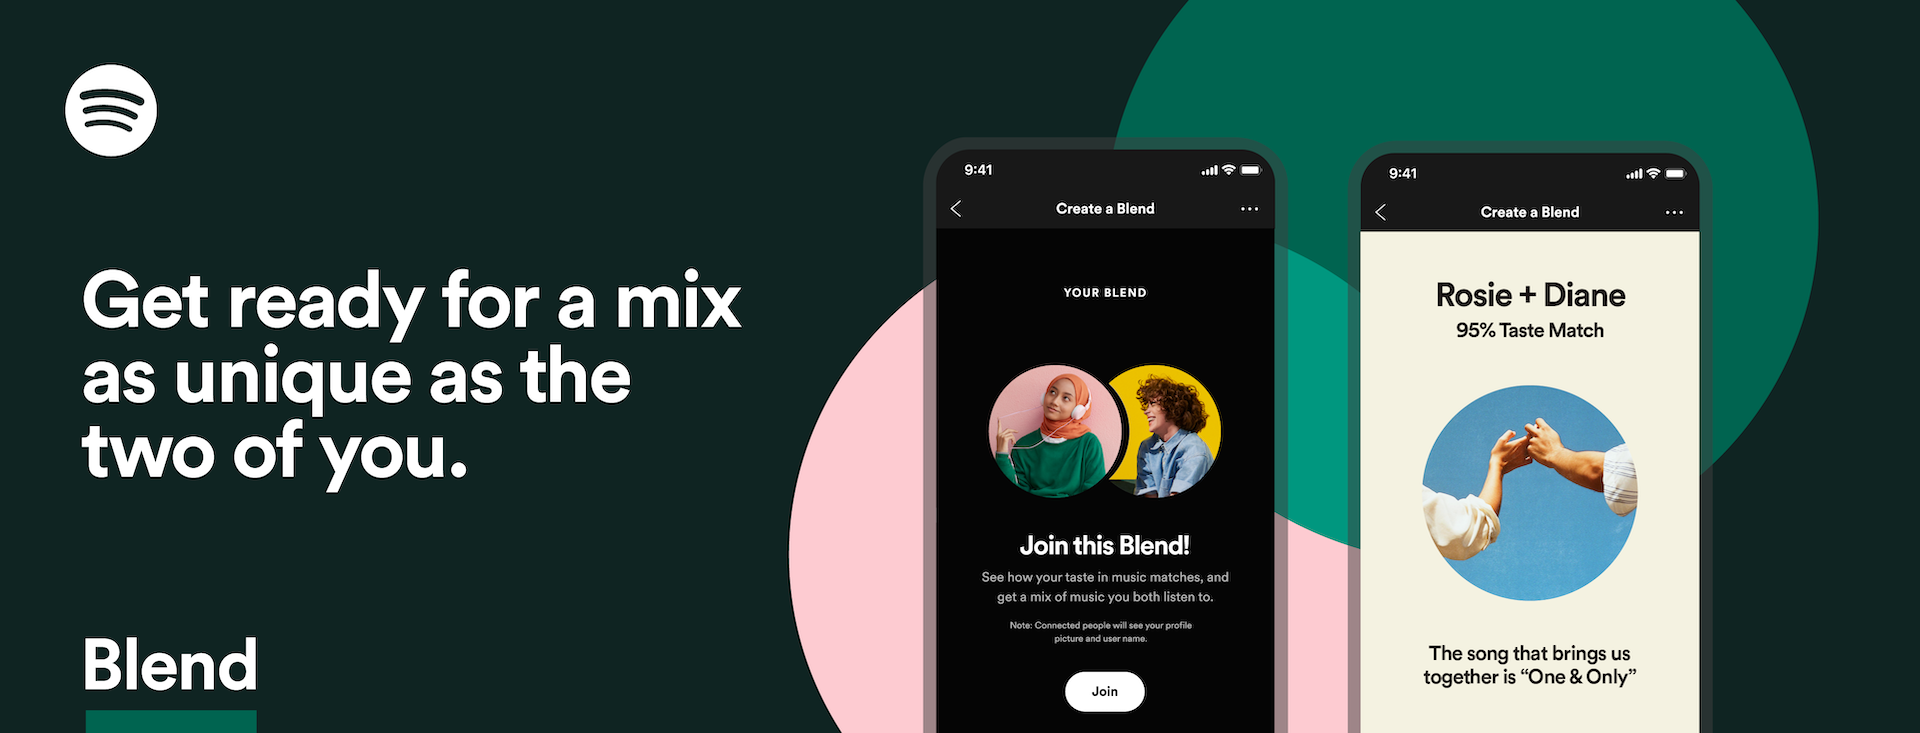 How to use Blend on Spotify